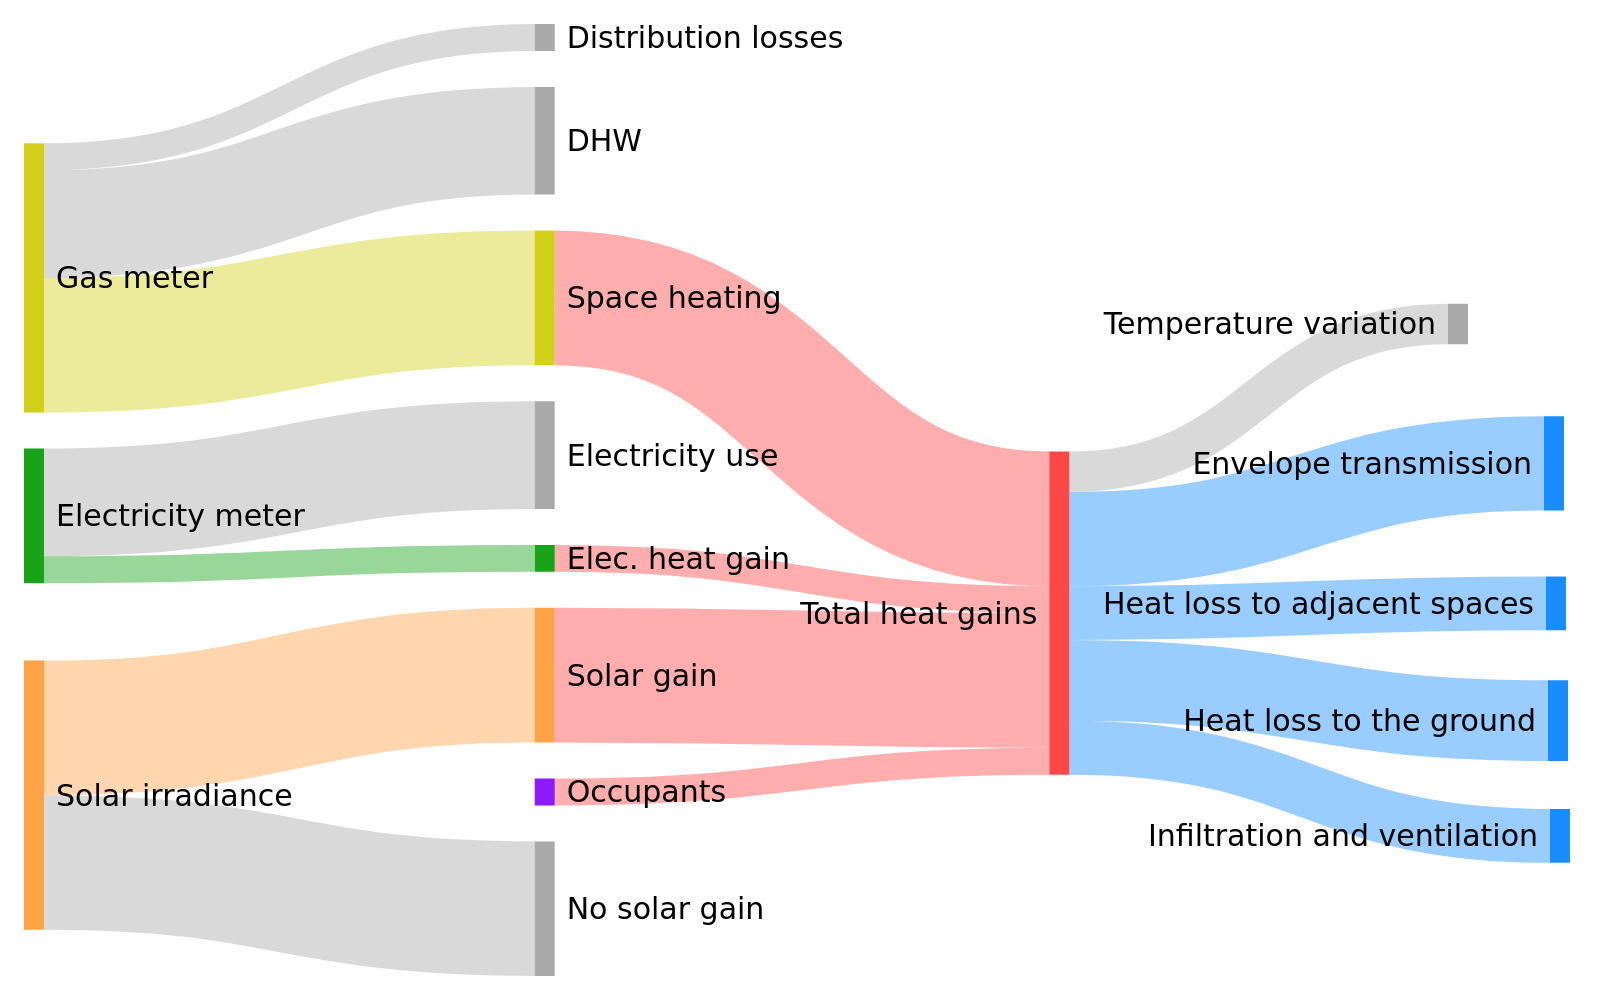 Decomposition of heat gains and losses in a heated zone